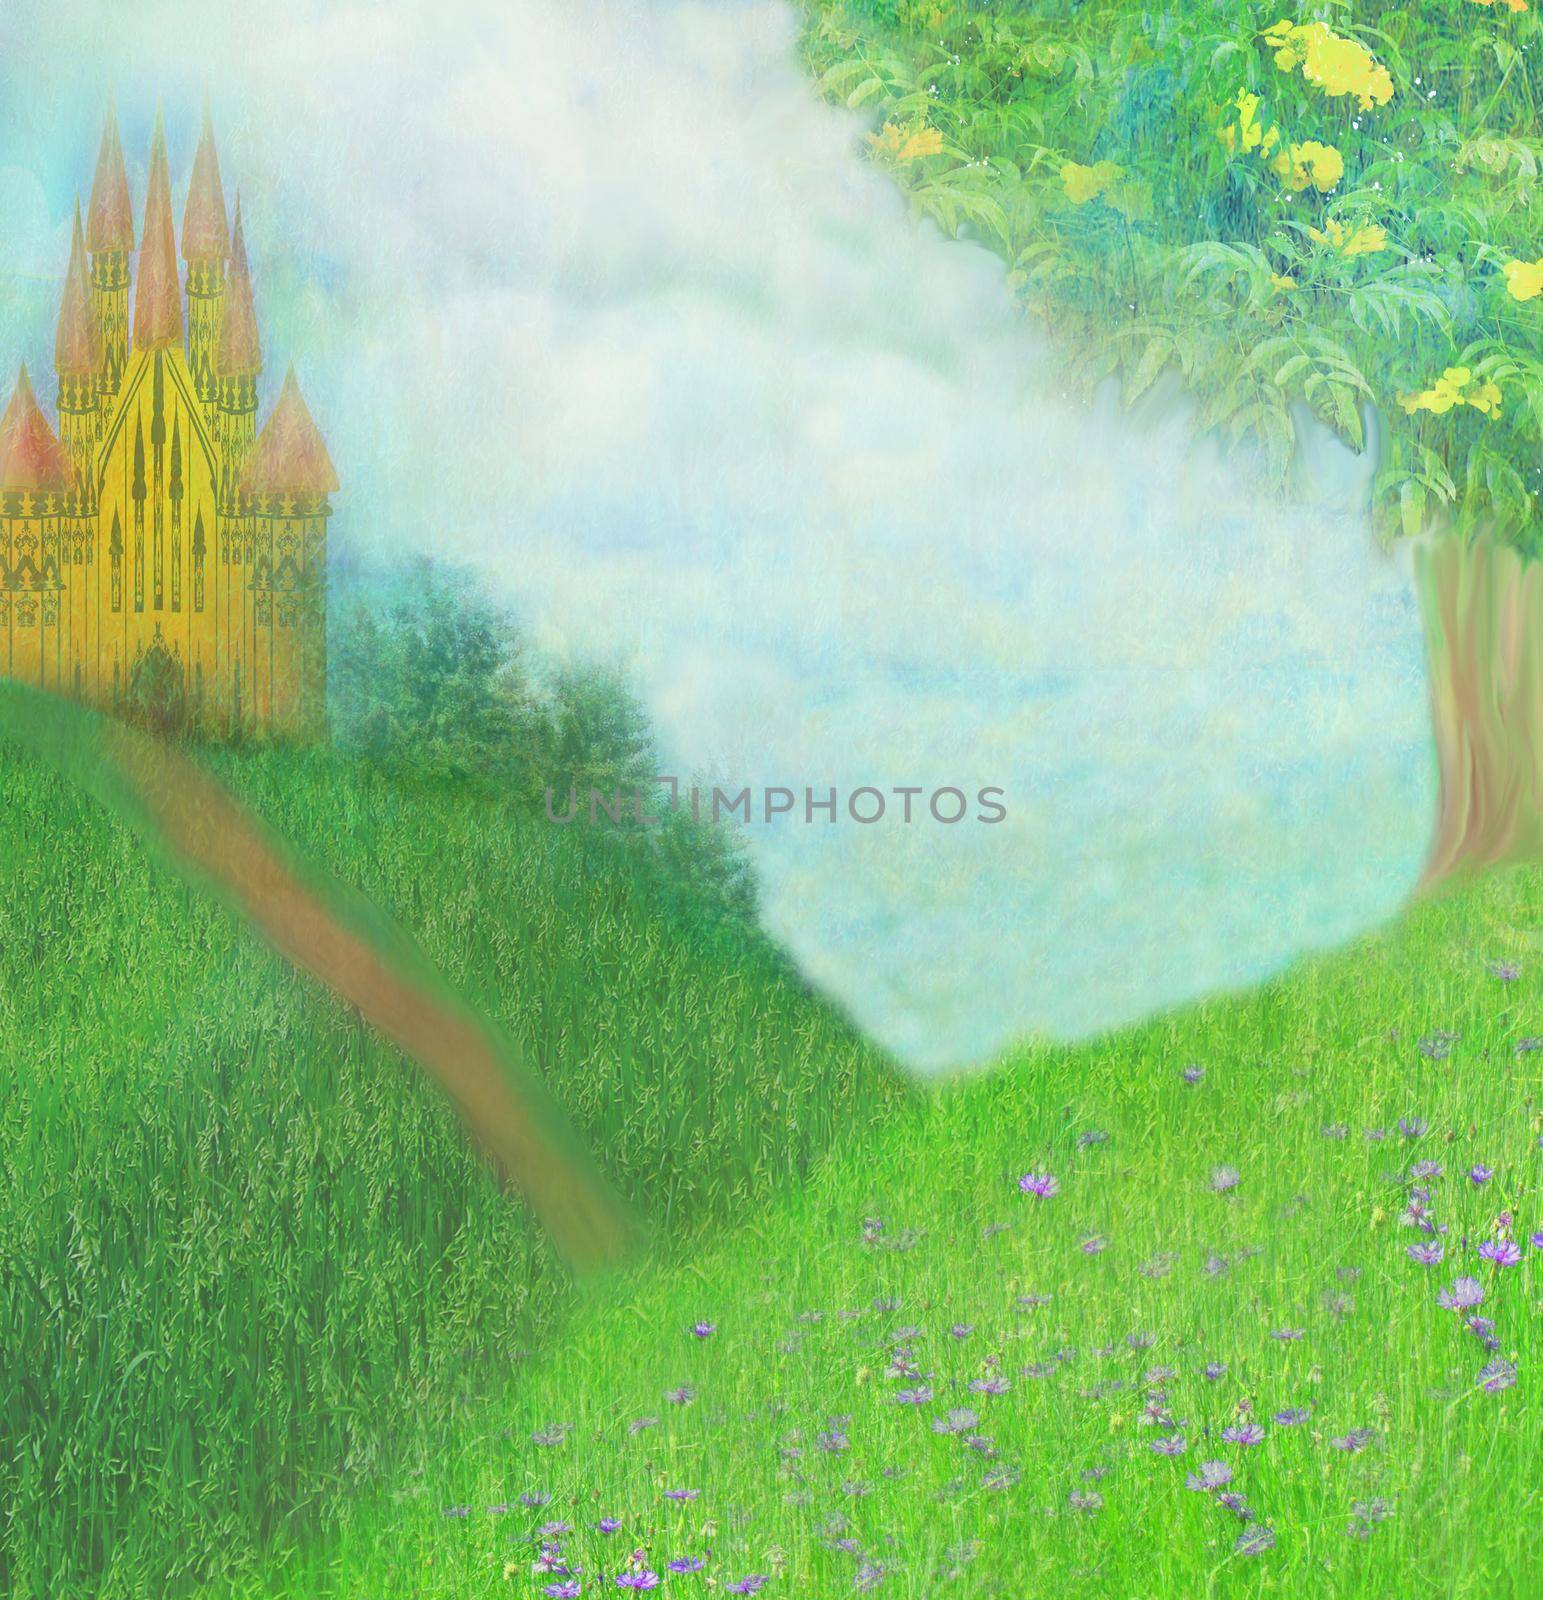 Fantasy meadow with a fairytale tower by JackyBrown